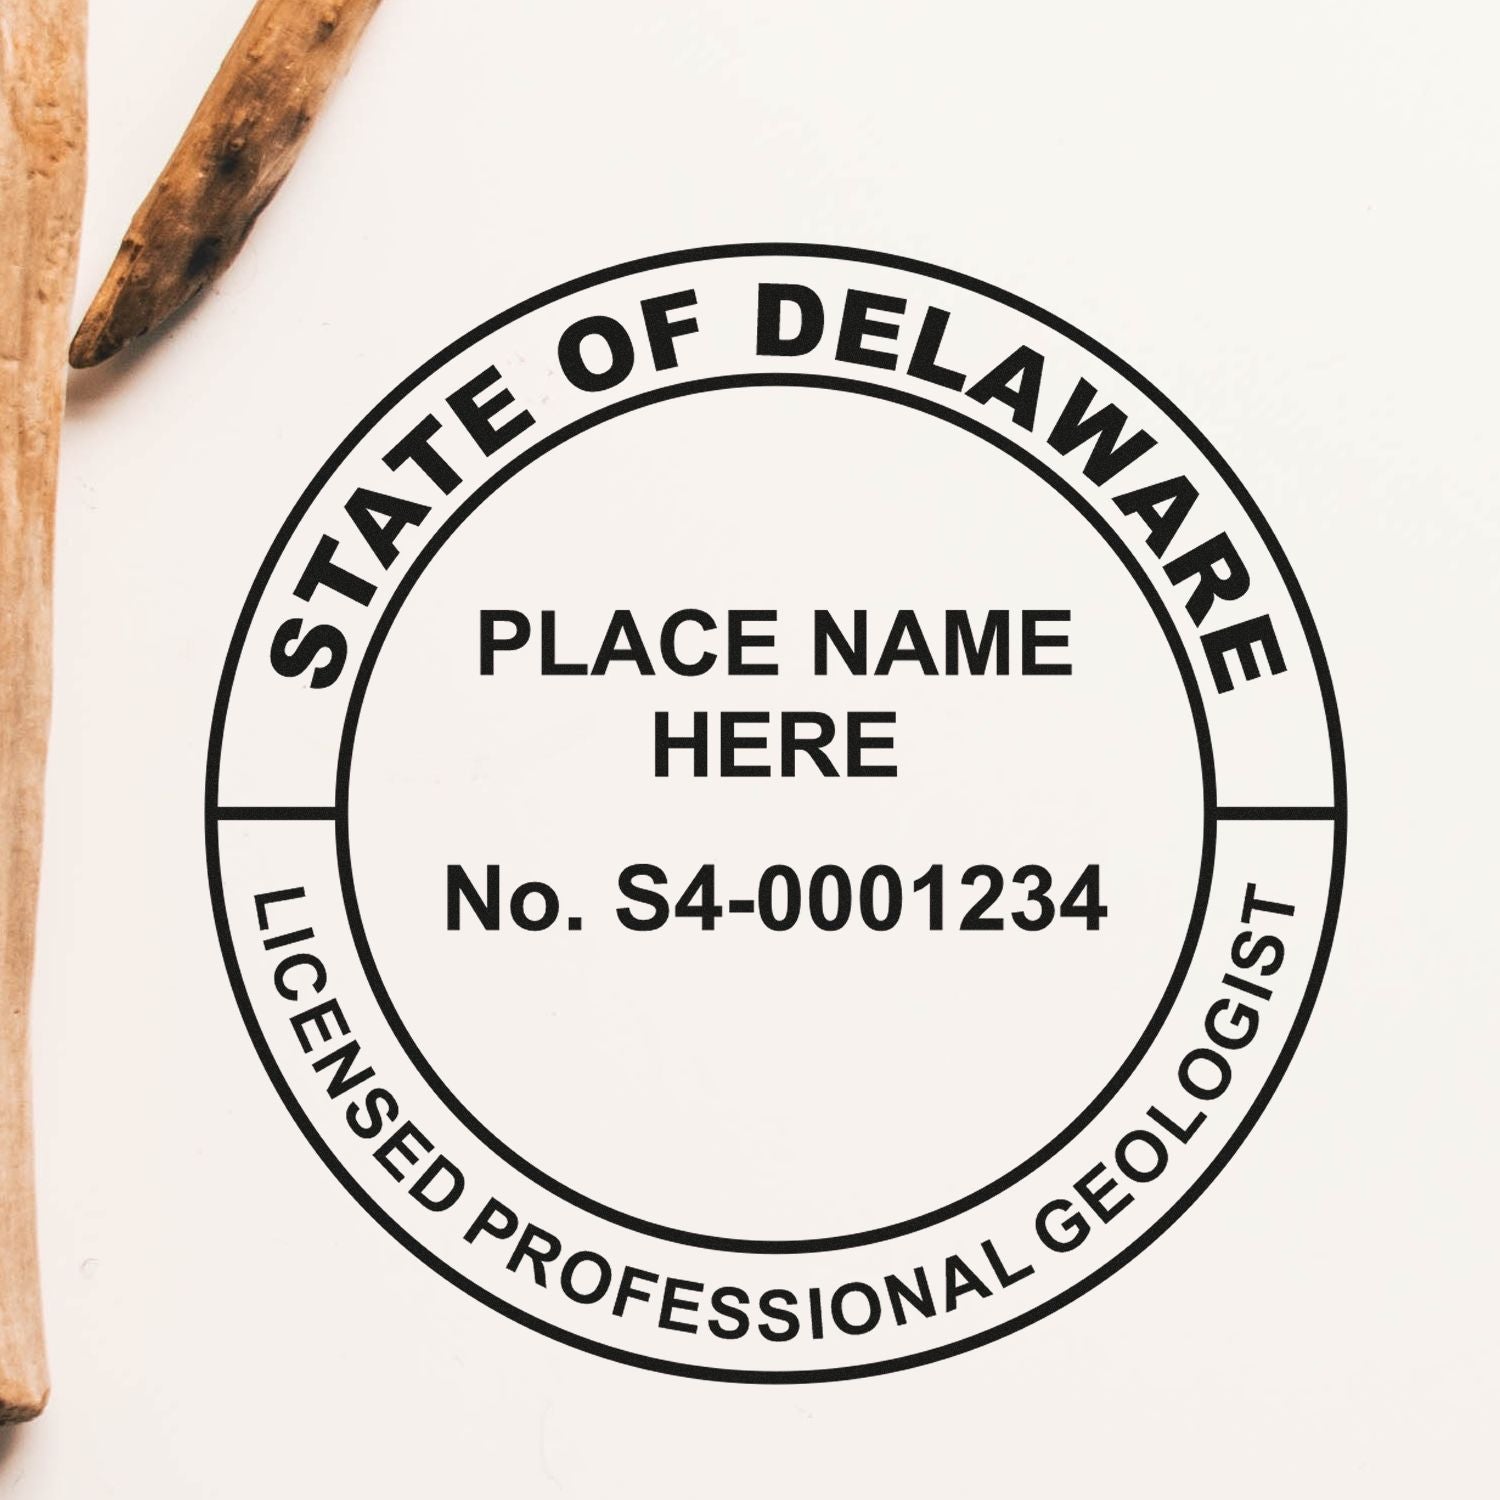 The main image for the Premium MaxLight Pre-Inked Delaware Geology Stamp depicting a sample of the imprint and imprint sample